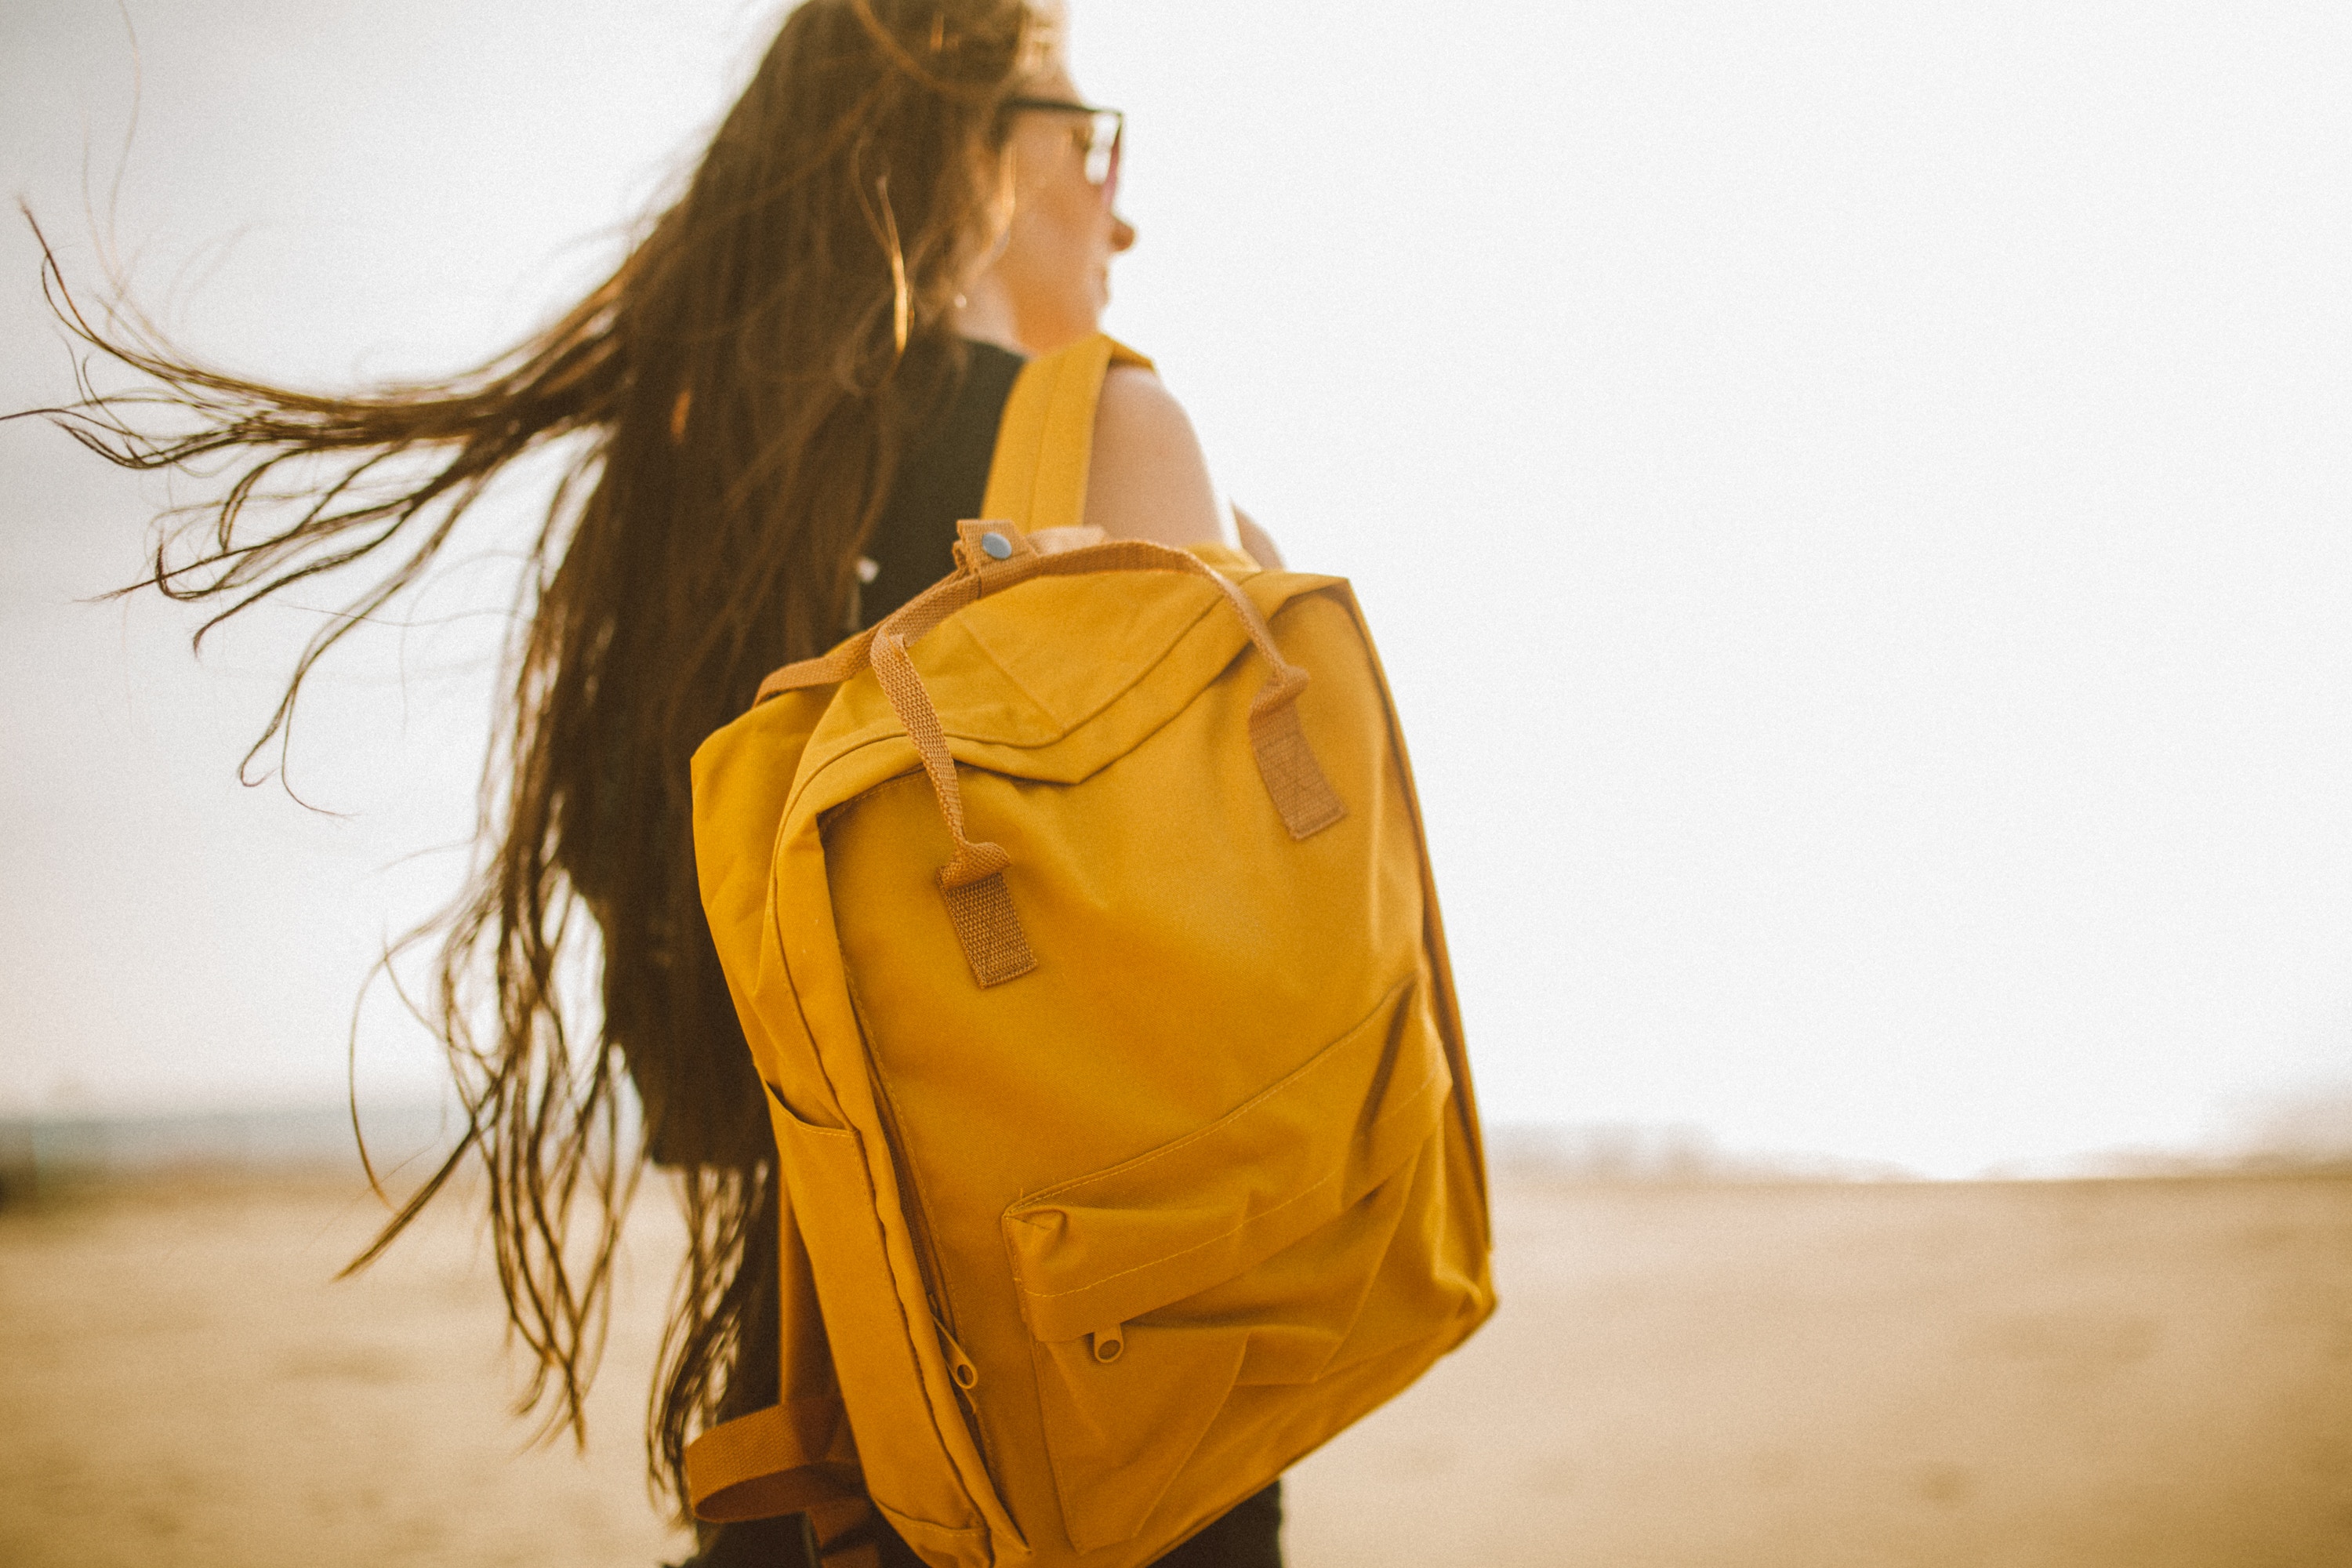 A woman with long hair holding onto a yellow bag